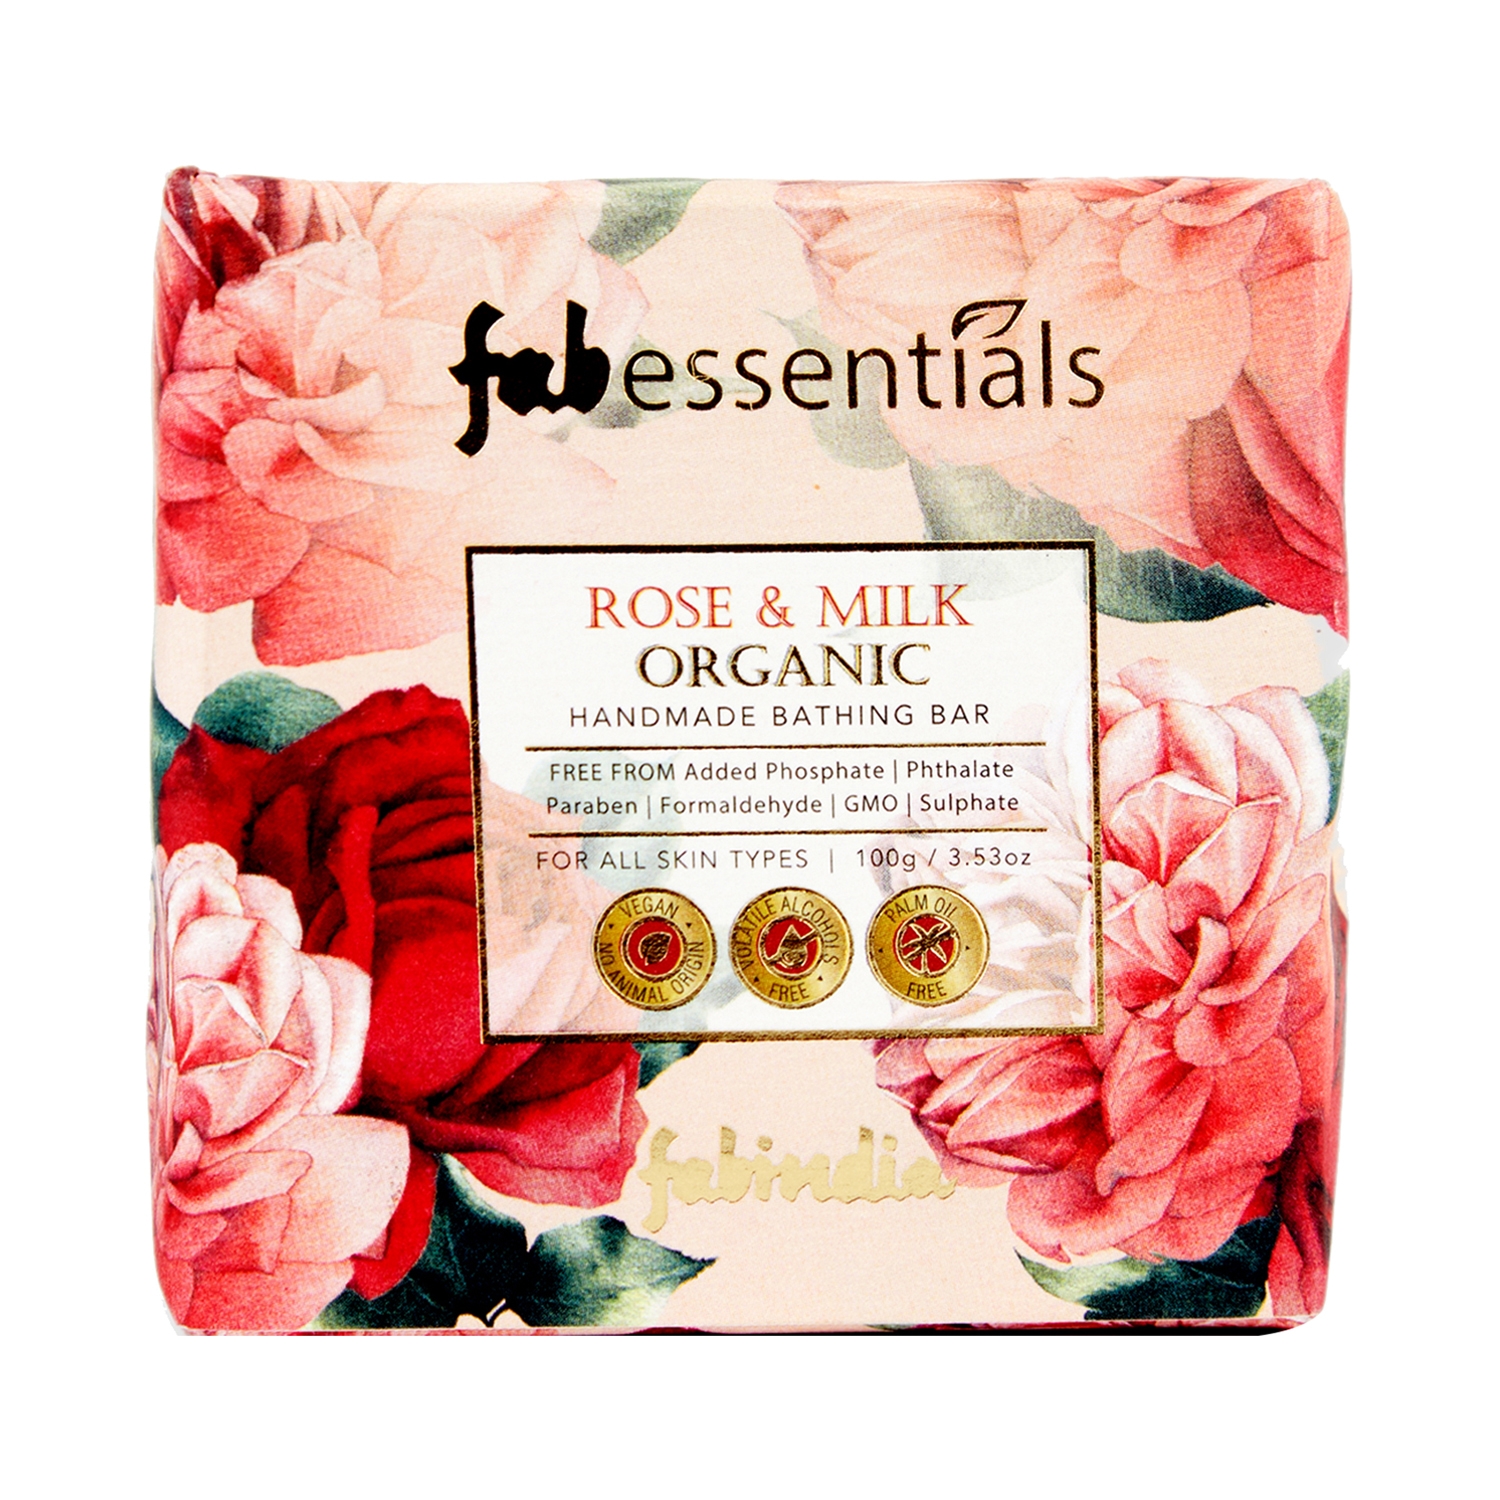 Fabessentials by Fabindia | Fabessentials by Fabindia Rose & Milk Handmade Bathing Bar 100% Organic With Coconut Oil & Vitamin E (100g)